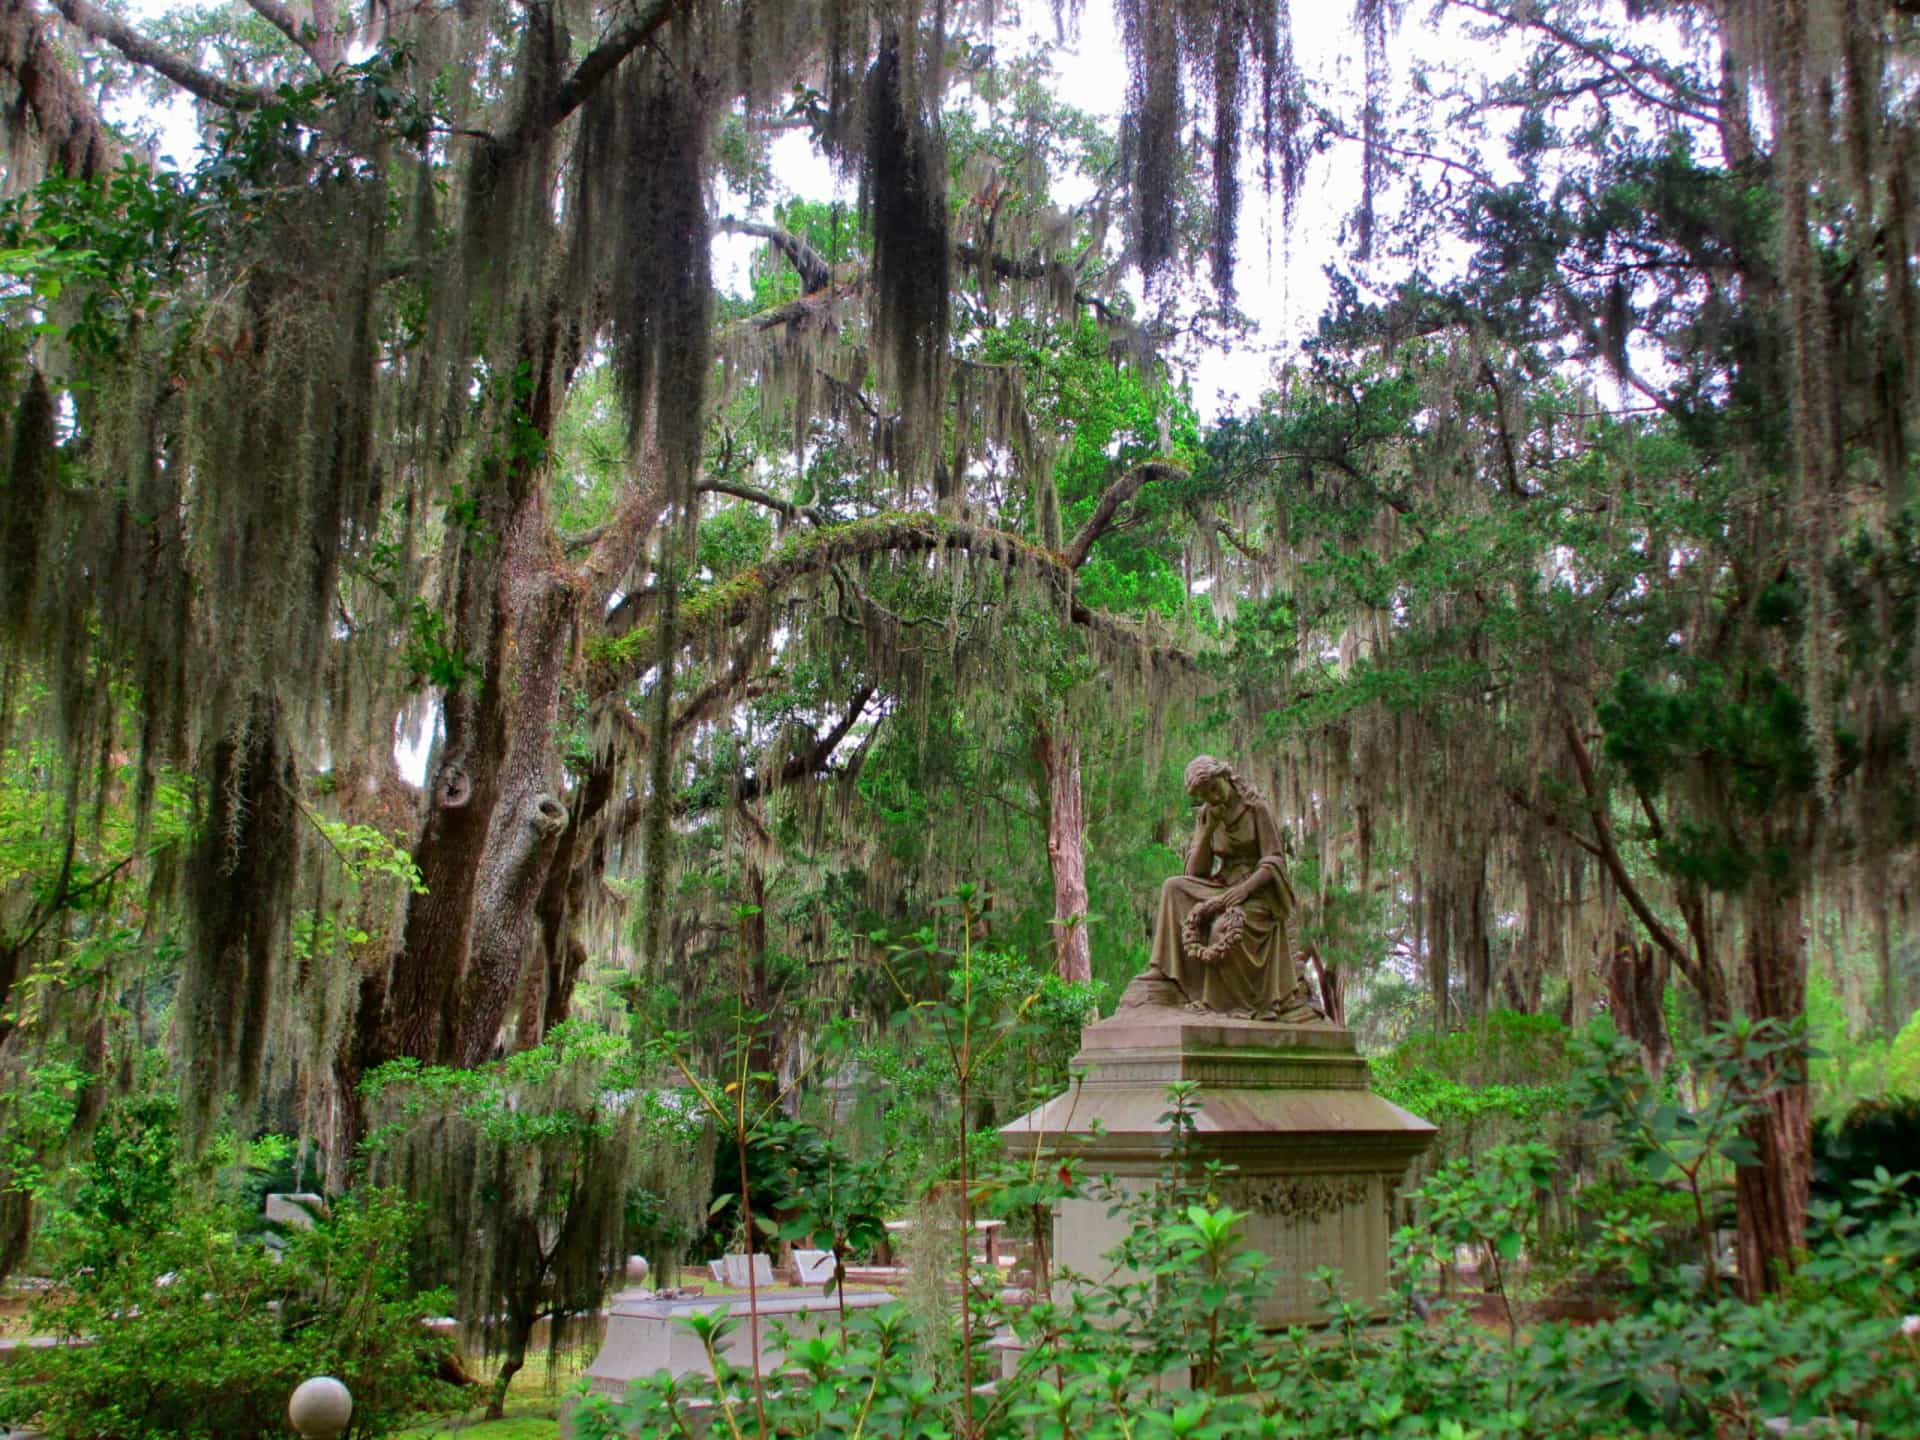 <p>Bonaventure Cemetery in Savannah became famous thanks to the 1994 novel 'Midnight in the Garden of Good and Evil.' It's home to a famous ghost of a six-year-old girl named Gracie Watson who died of pneumonia. Some visitors have claimed to hear and see the girl, among other paranormal activity. </p>